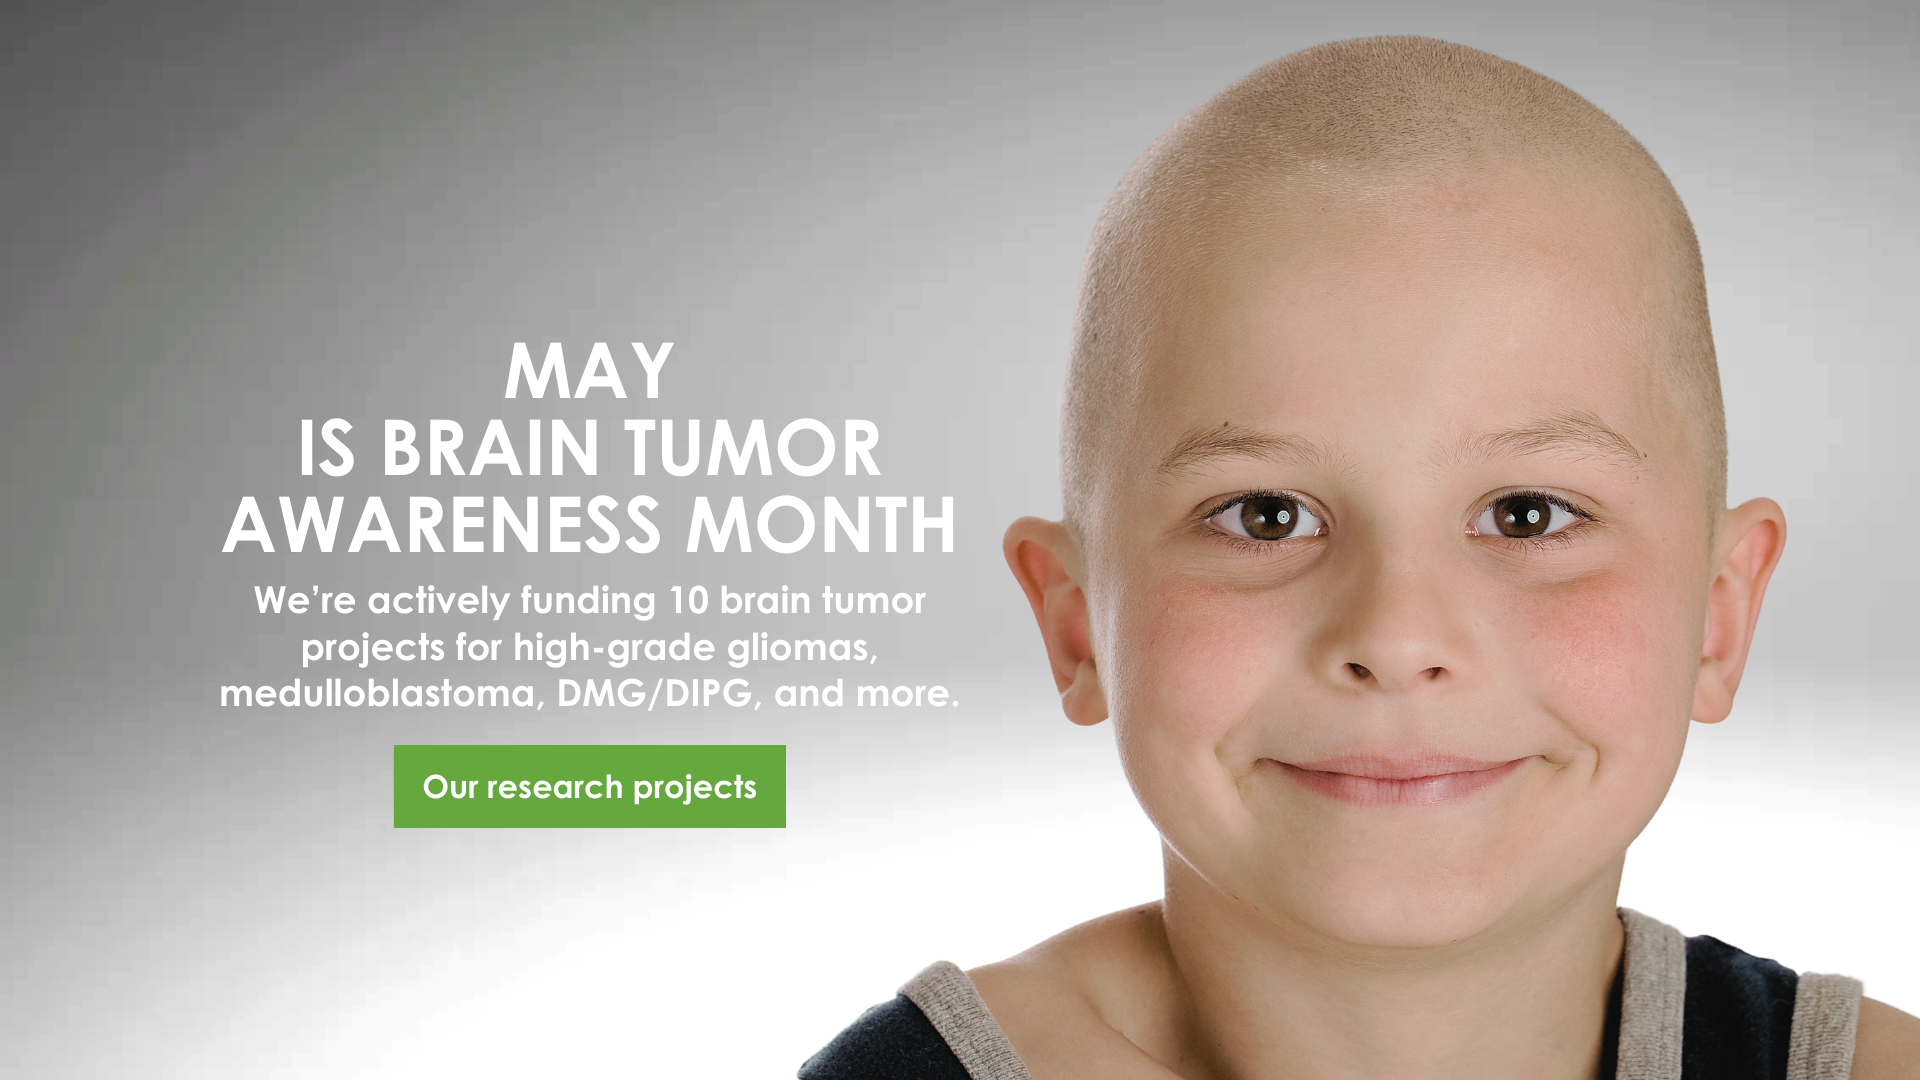 CureSearch for Children's Cancer, support cures by donating now